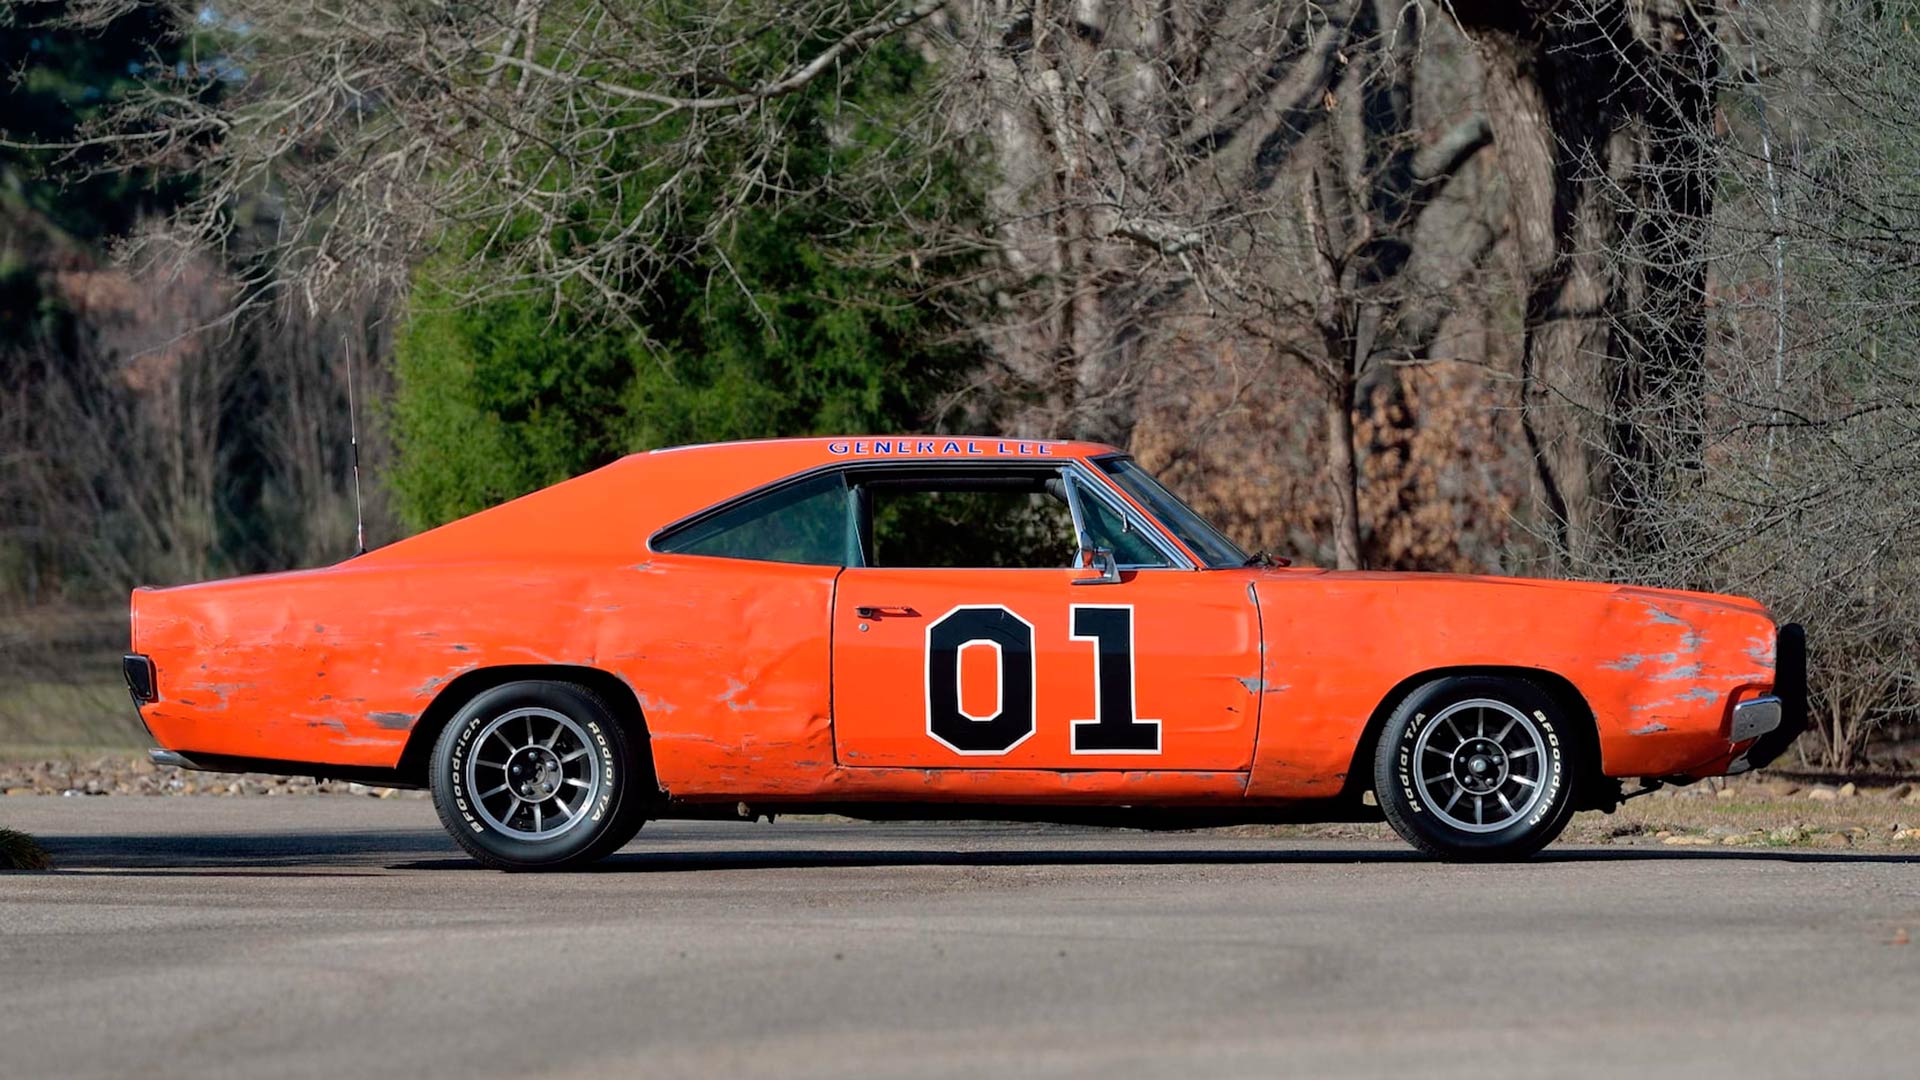 Mecum Indy 2019 Dukes of Hazzard Dodge Charger